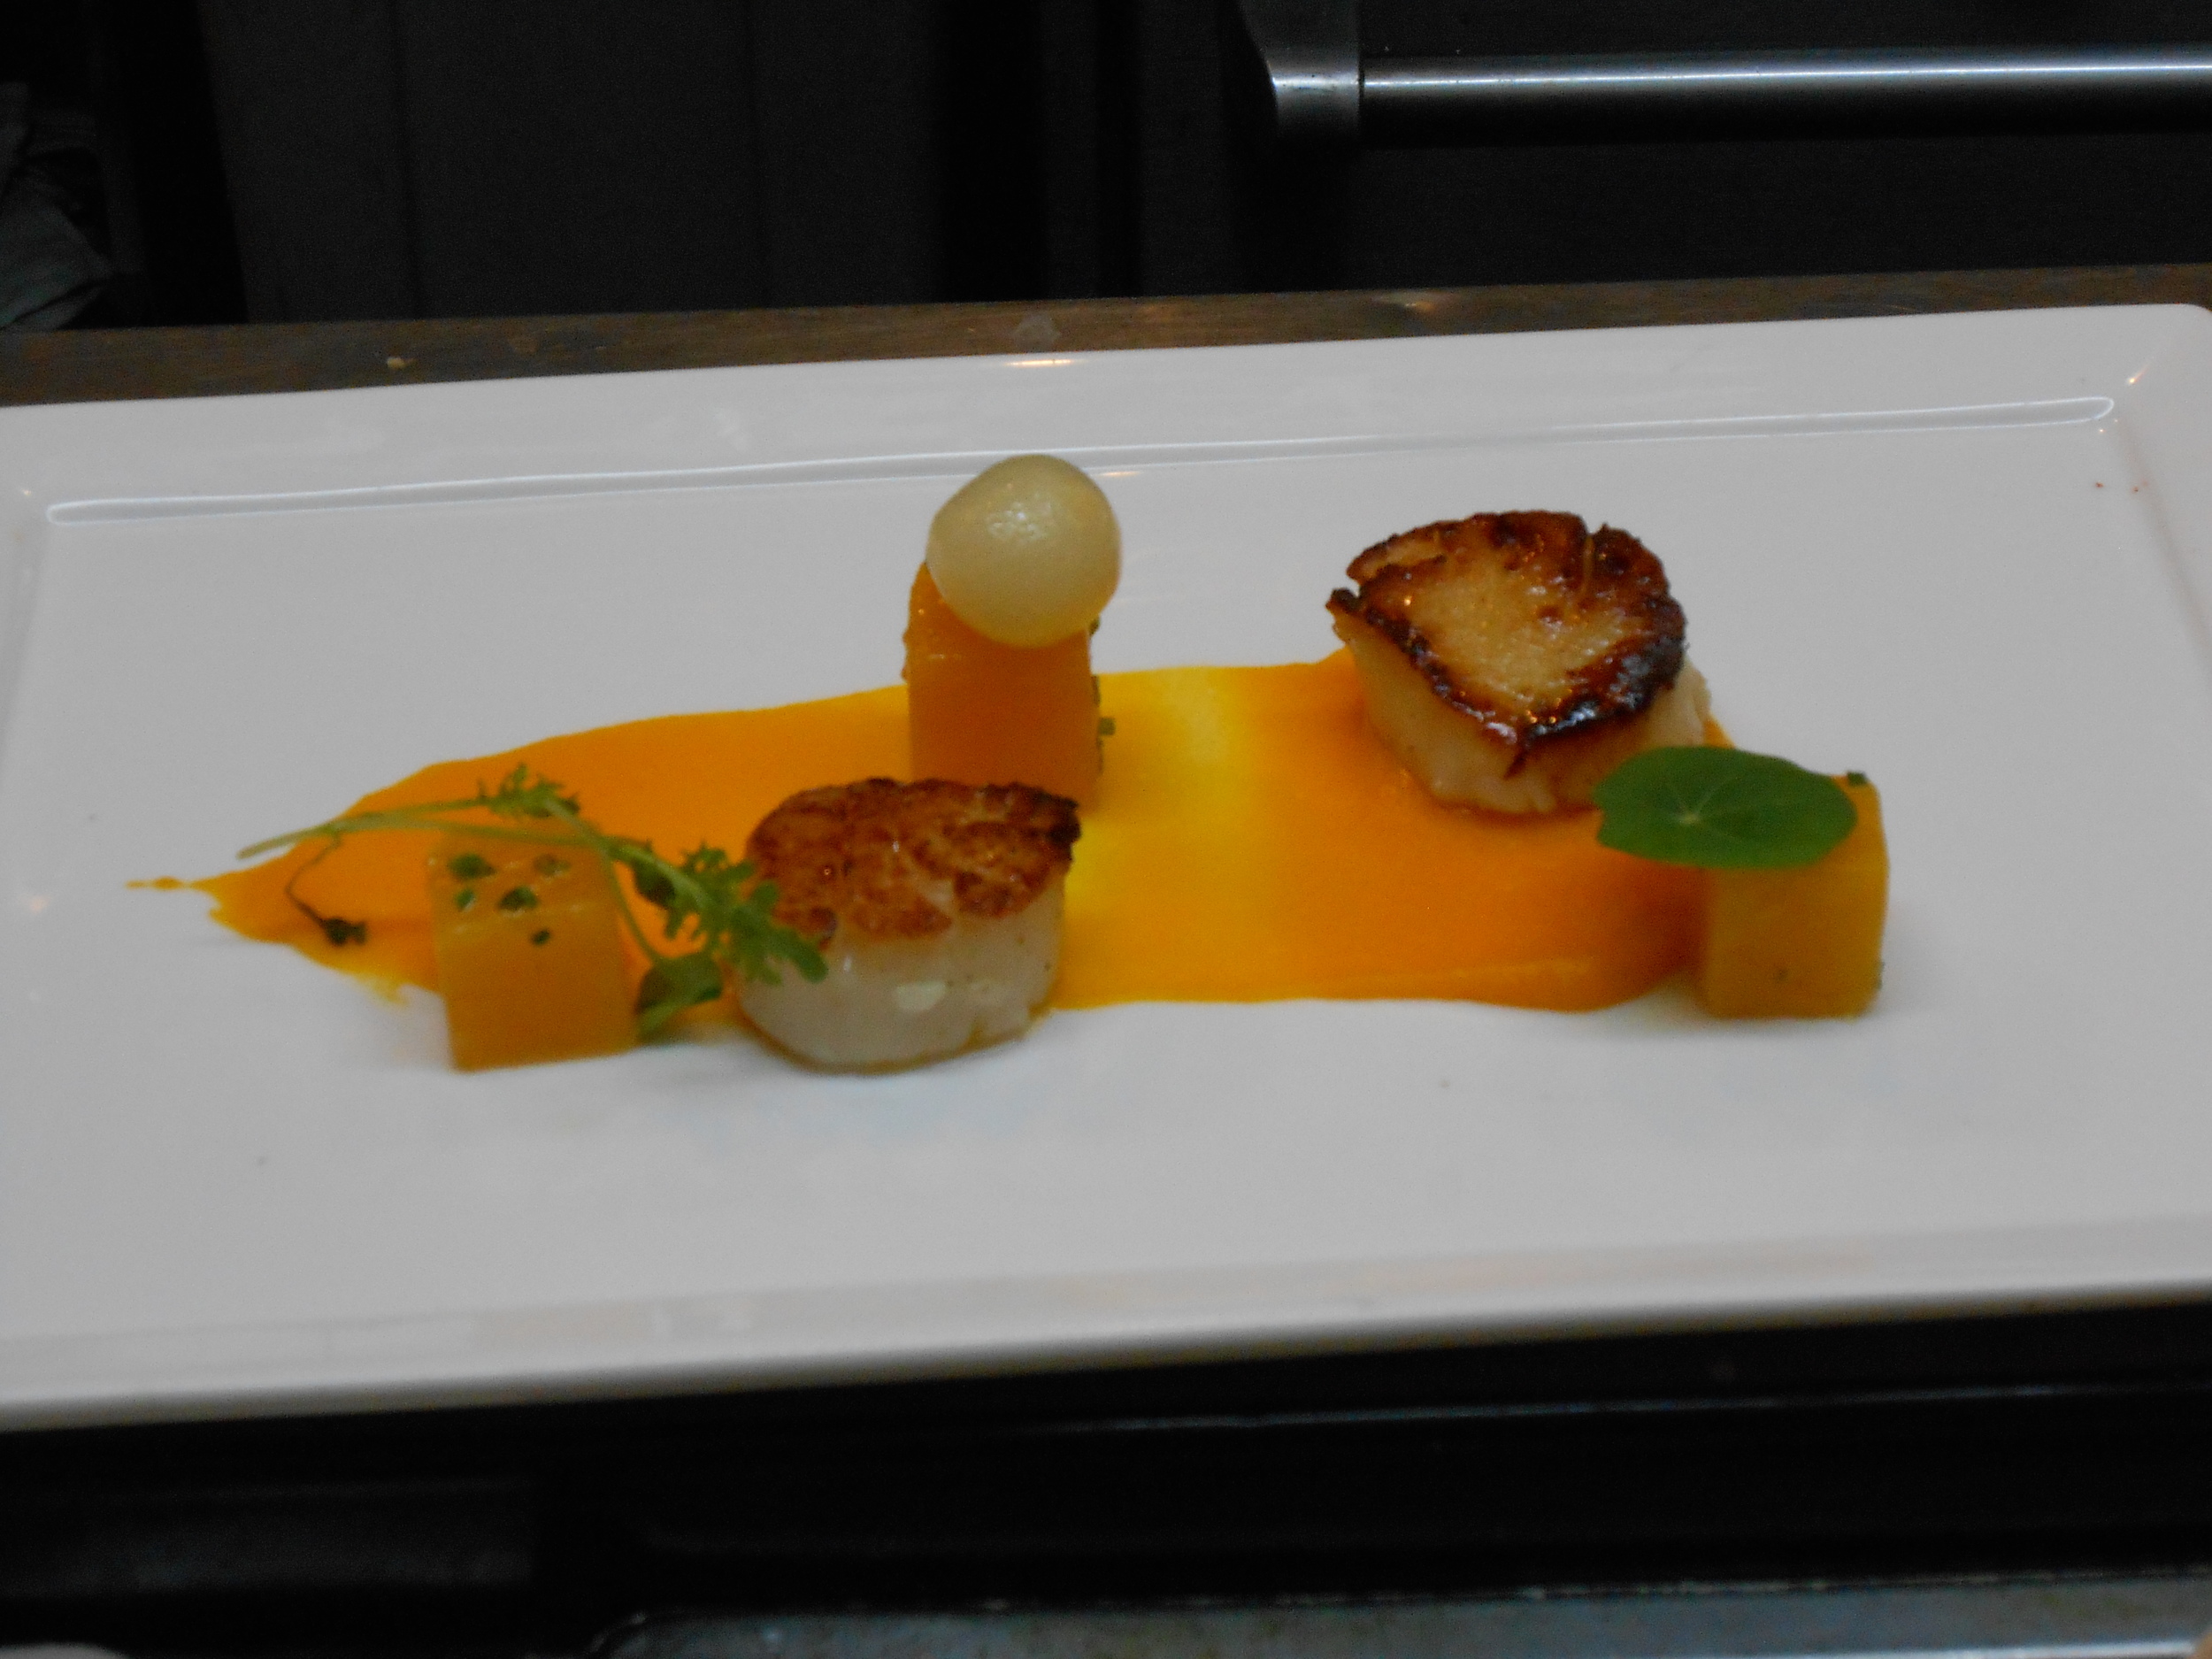 Second course: Scallops with butternut squash, curry, and coconut